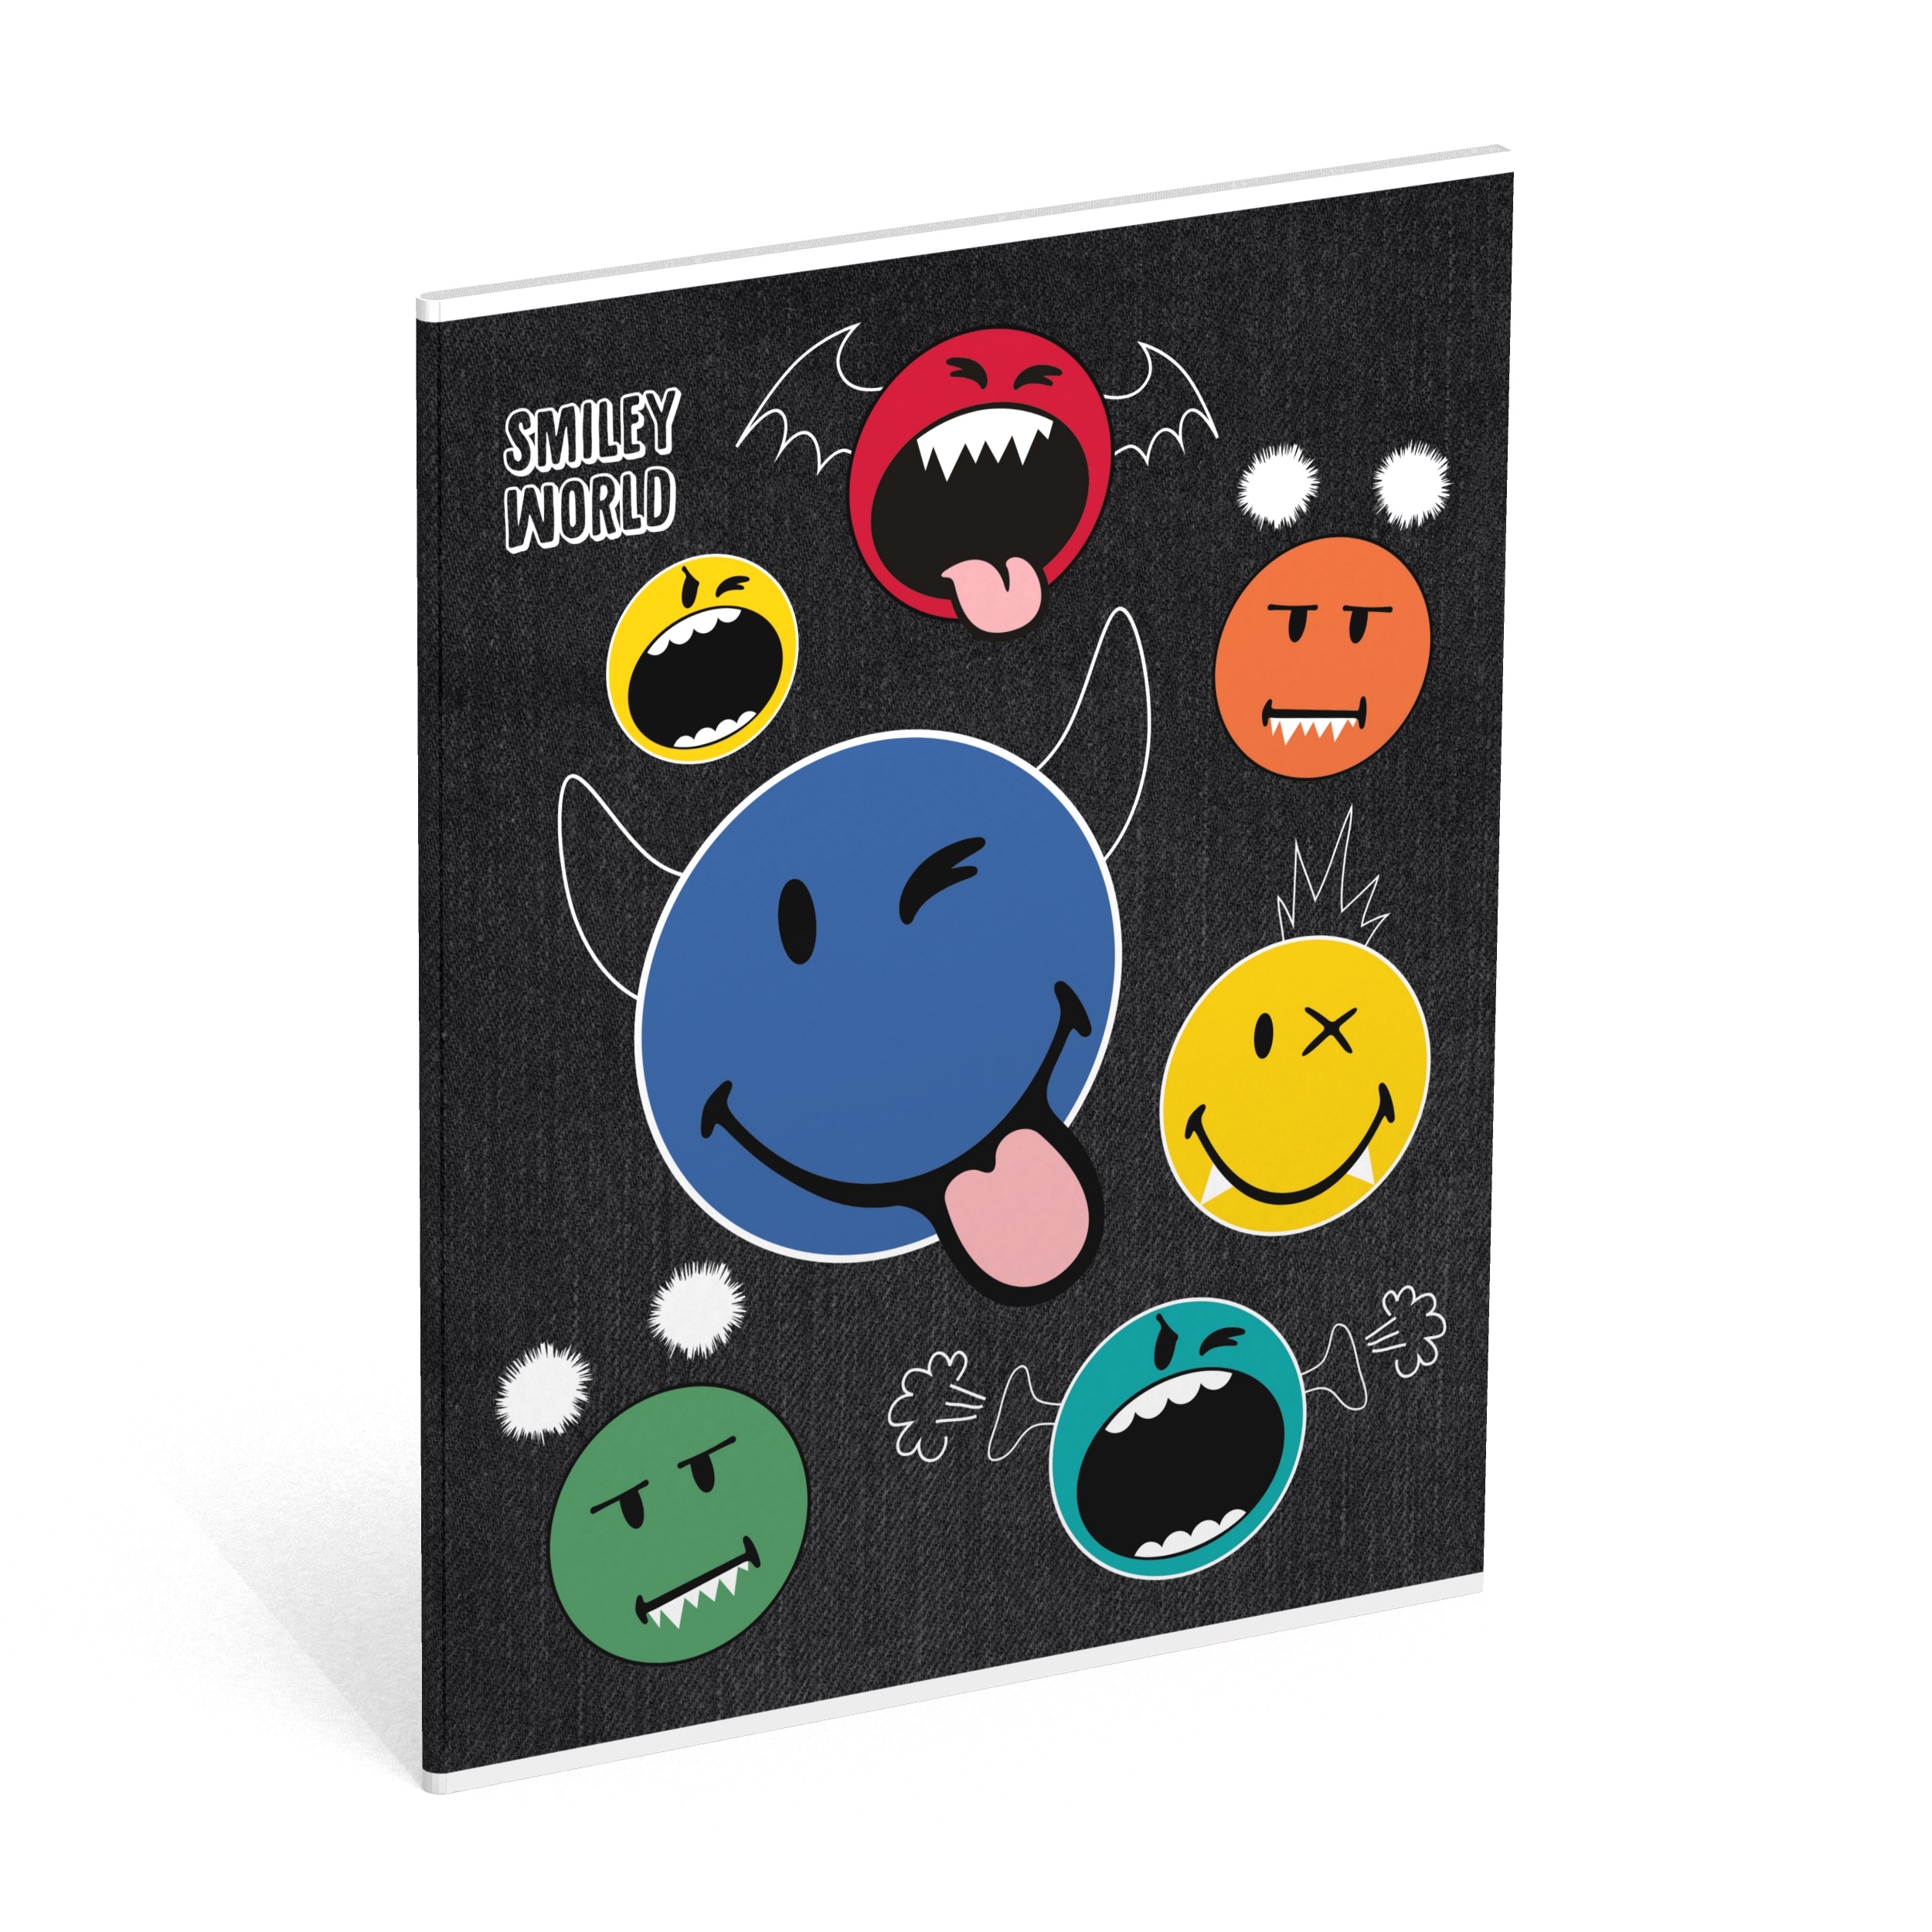 ROOST Notizheft Smiley WD Crazy 503633 monster smiley,17x2x21cm 3pcs.